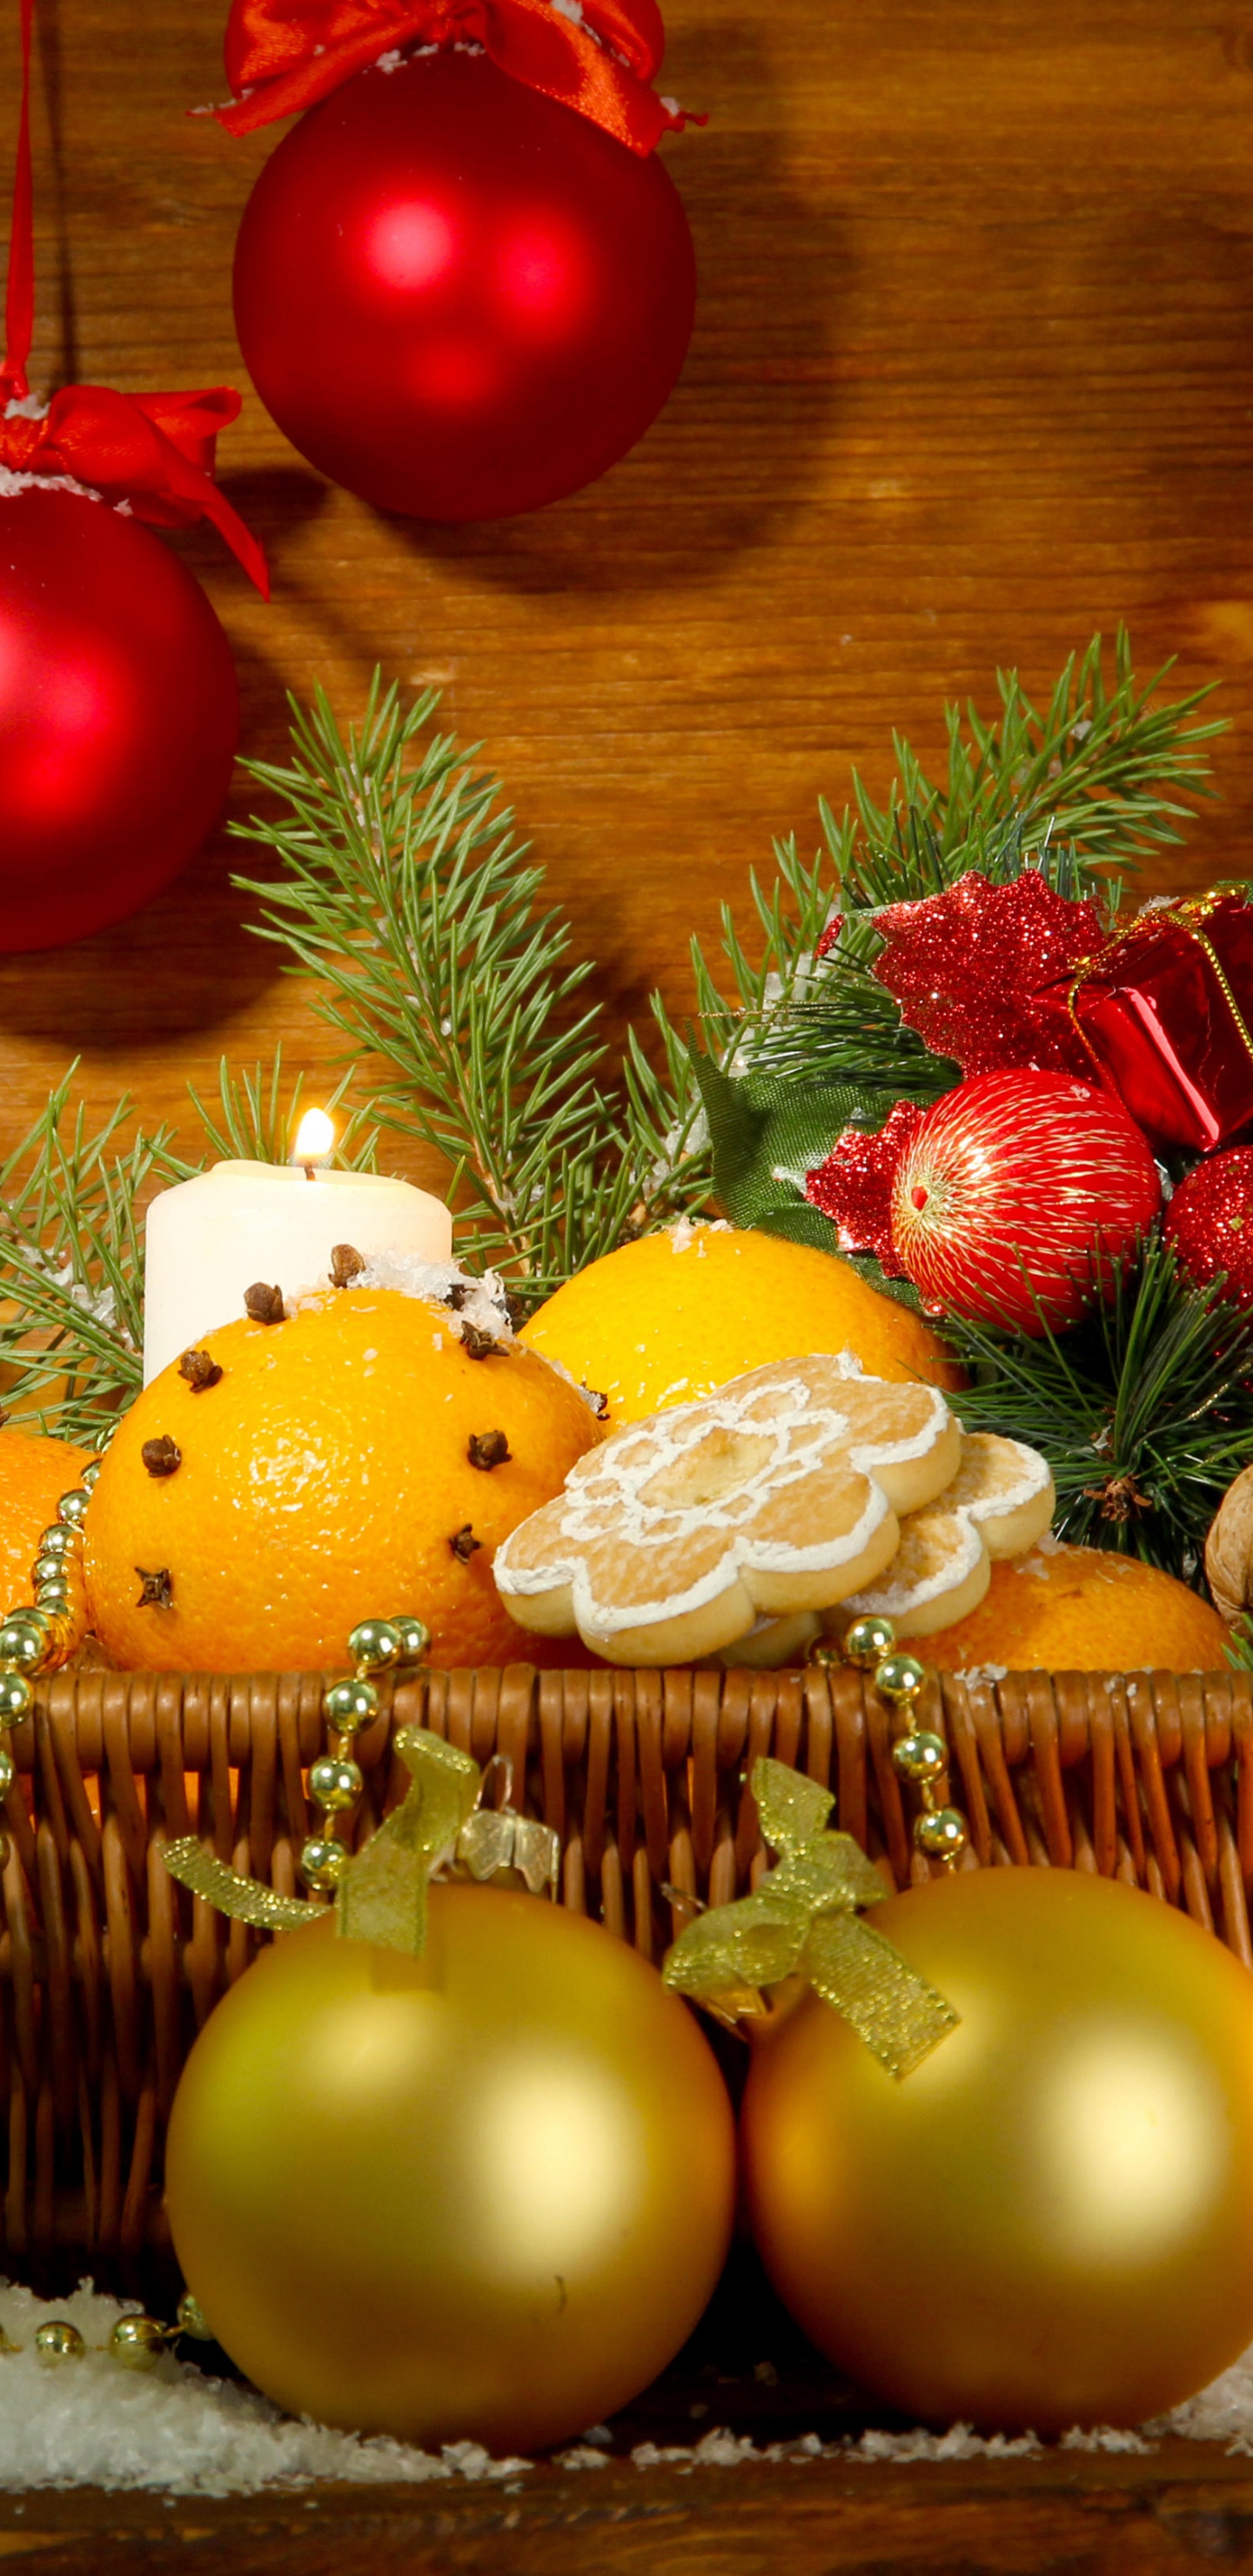 New Year, Christmas Day, Christmas Ornament, Christmas Decoration, Still Life. Wallpaper in 1440x2960 Resolution